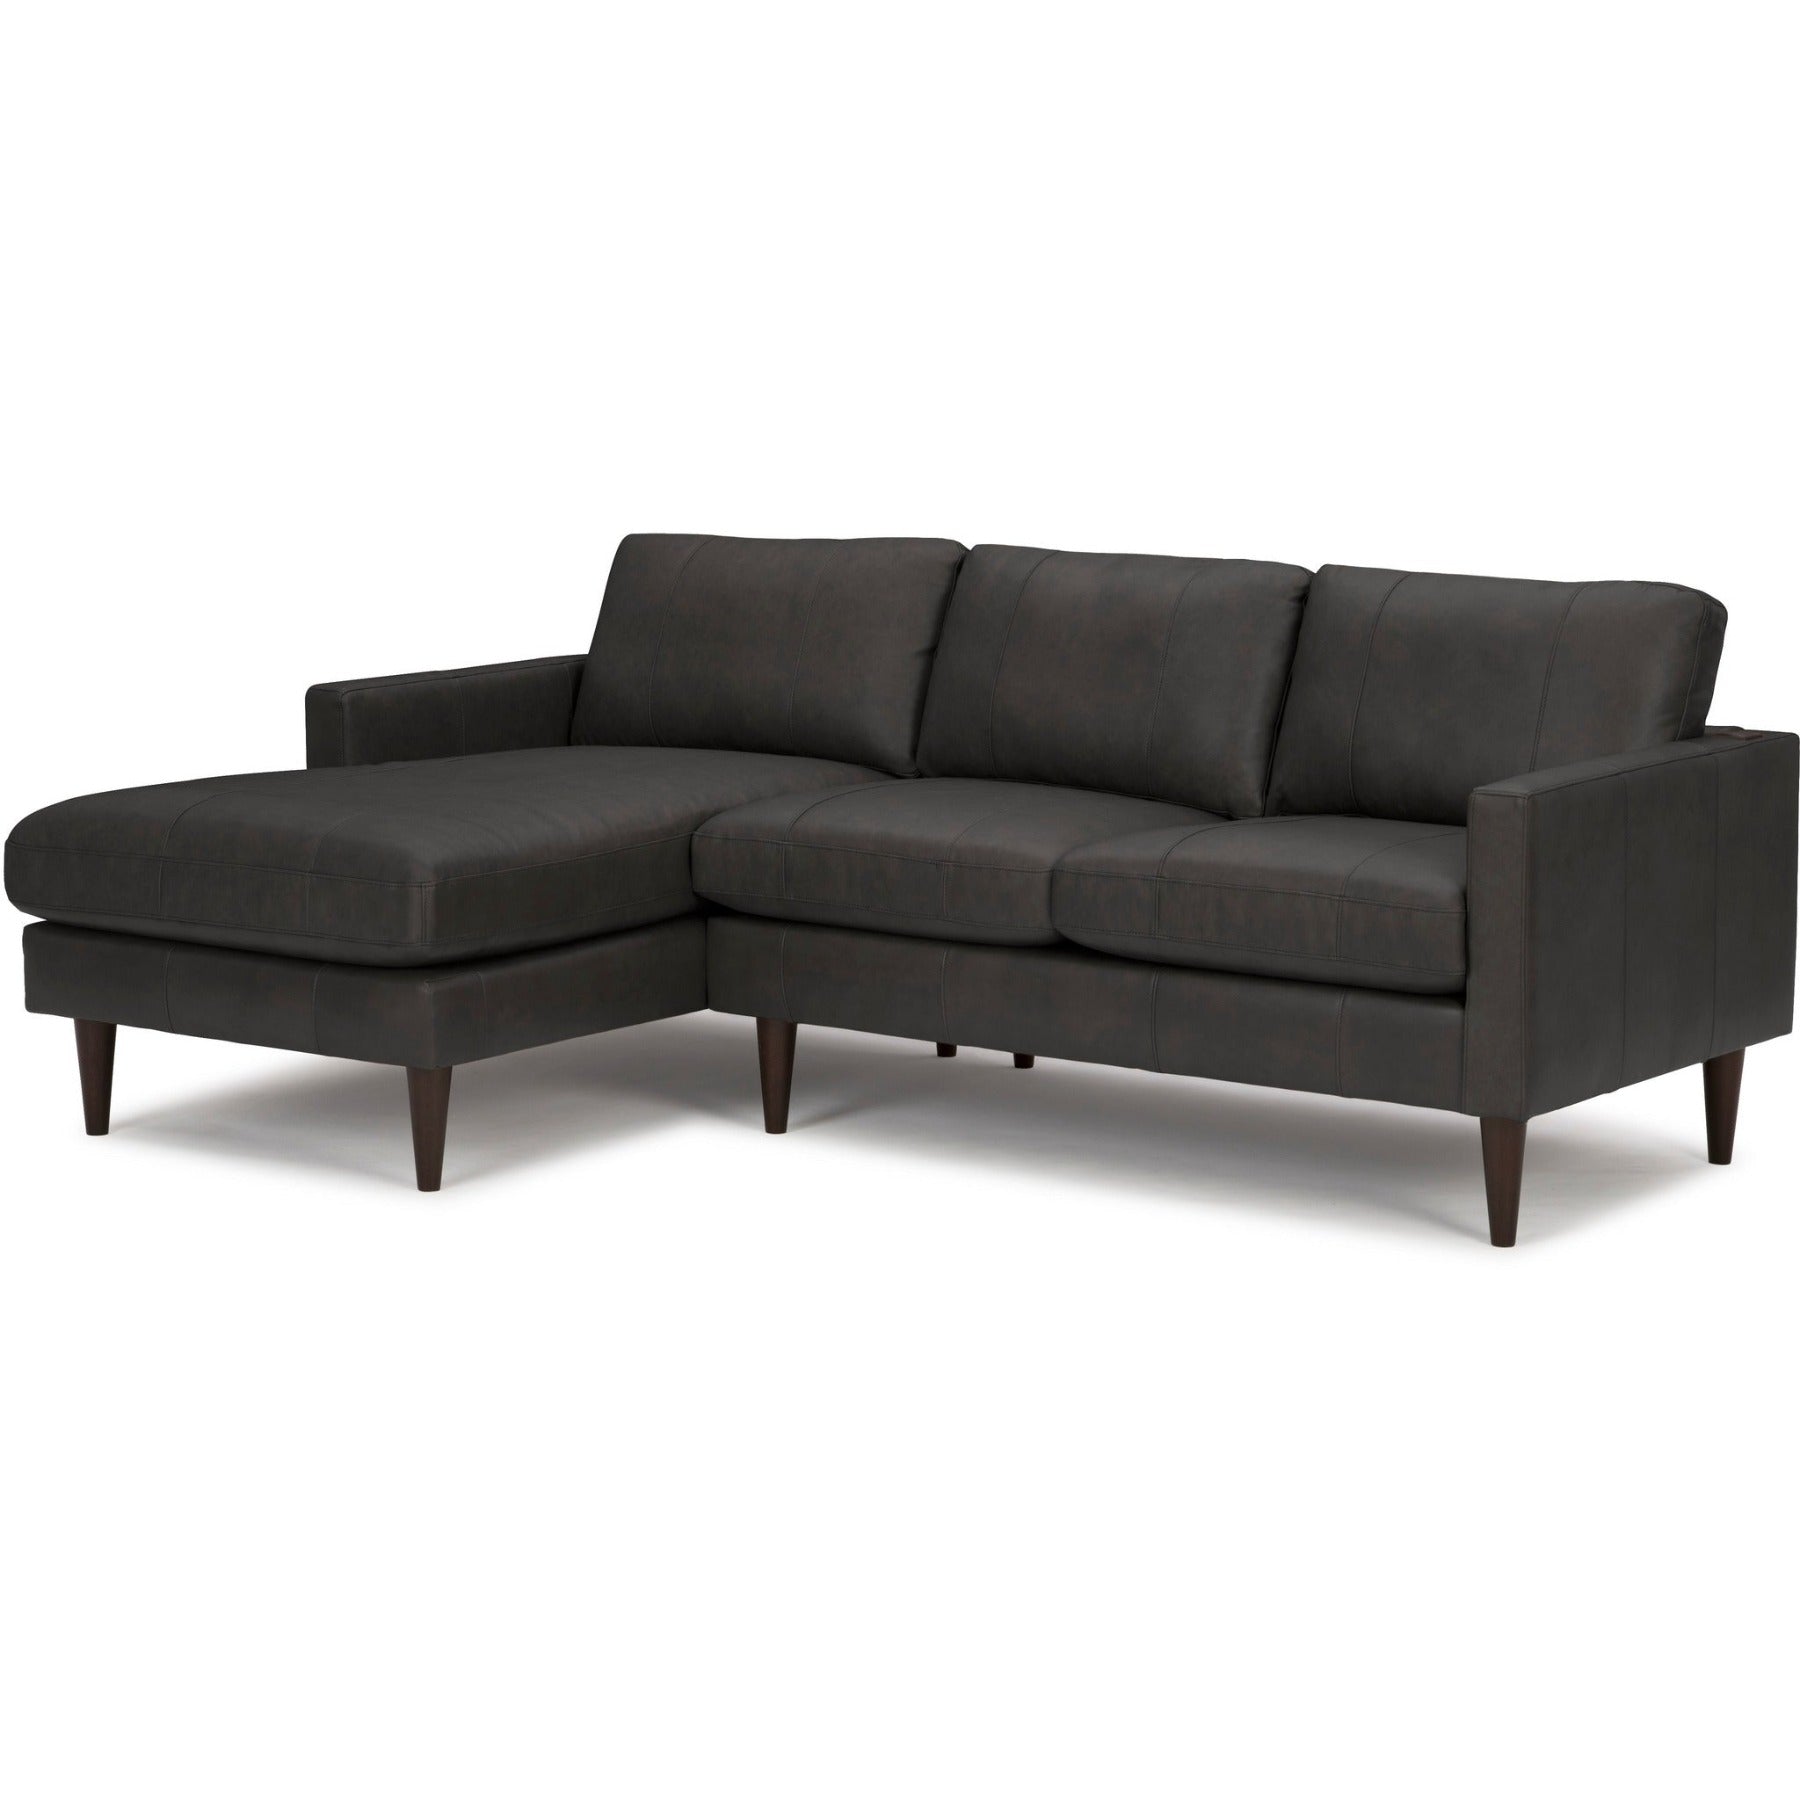 Trafton Leather Sofa Chaise Charcoal